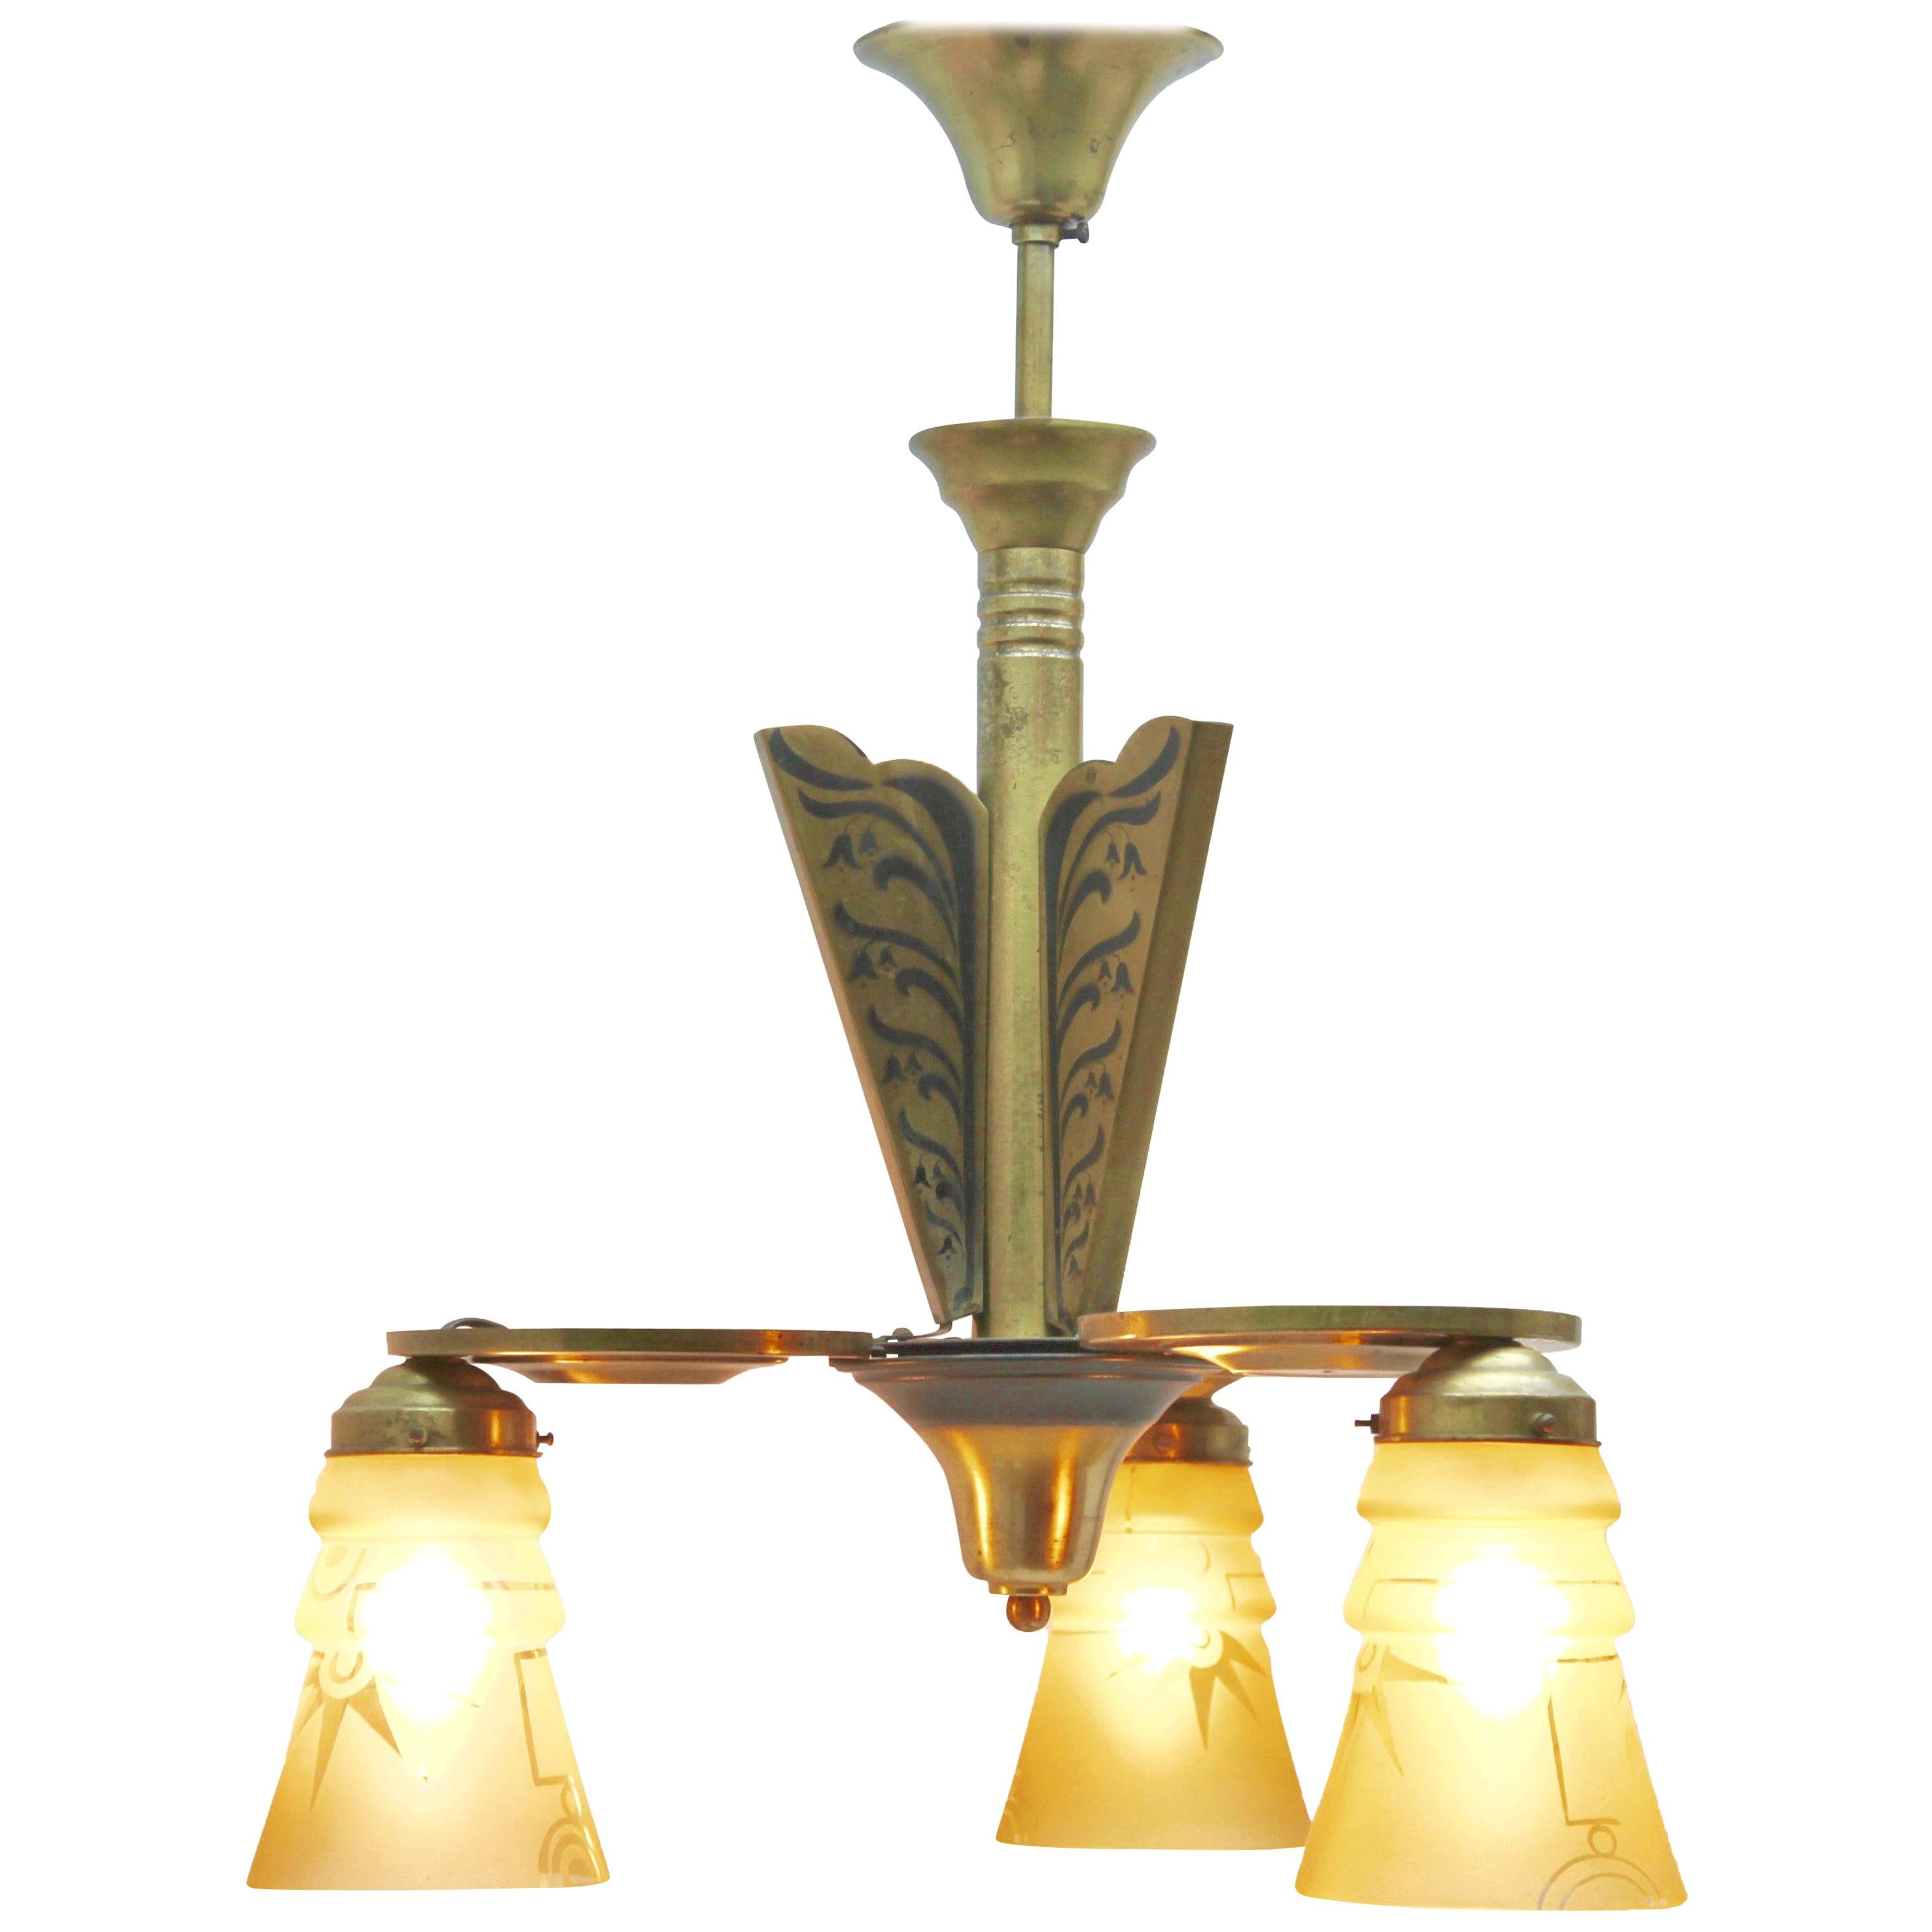 Art Deco Brass Chandelier Three Arms Glass Lampshades Whit Pattern